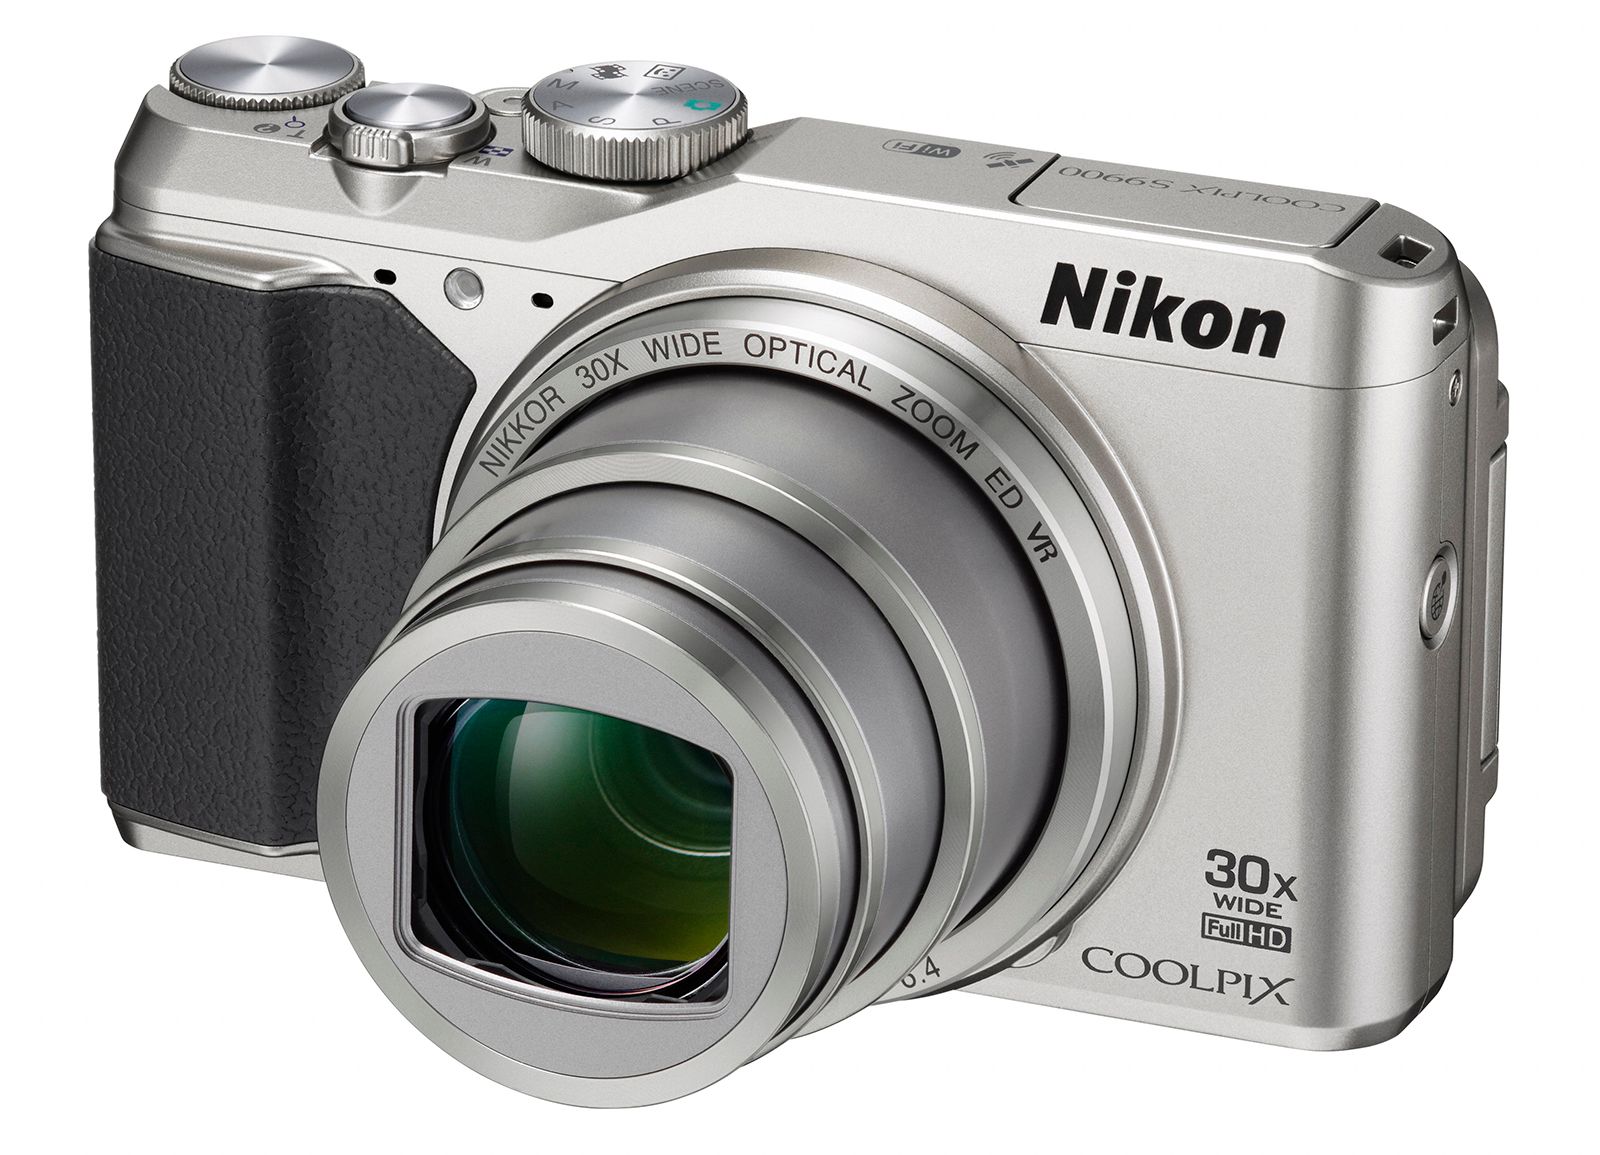 nikon coolpix s9900 30x zoom compact adds vari angle screen for extra flexibility image 1